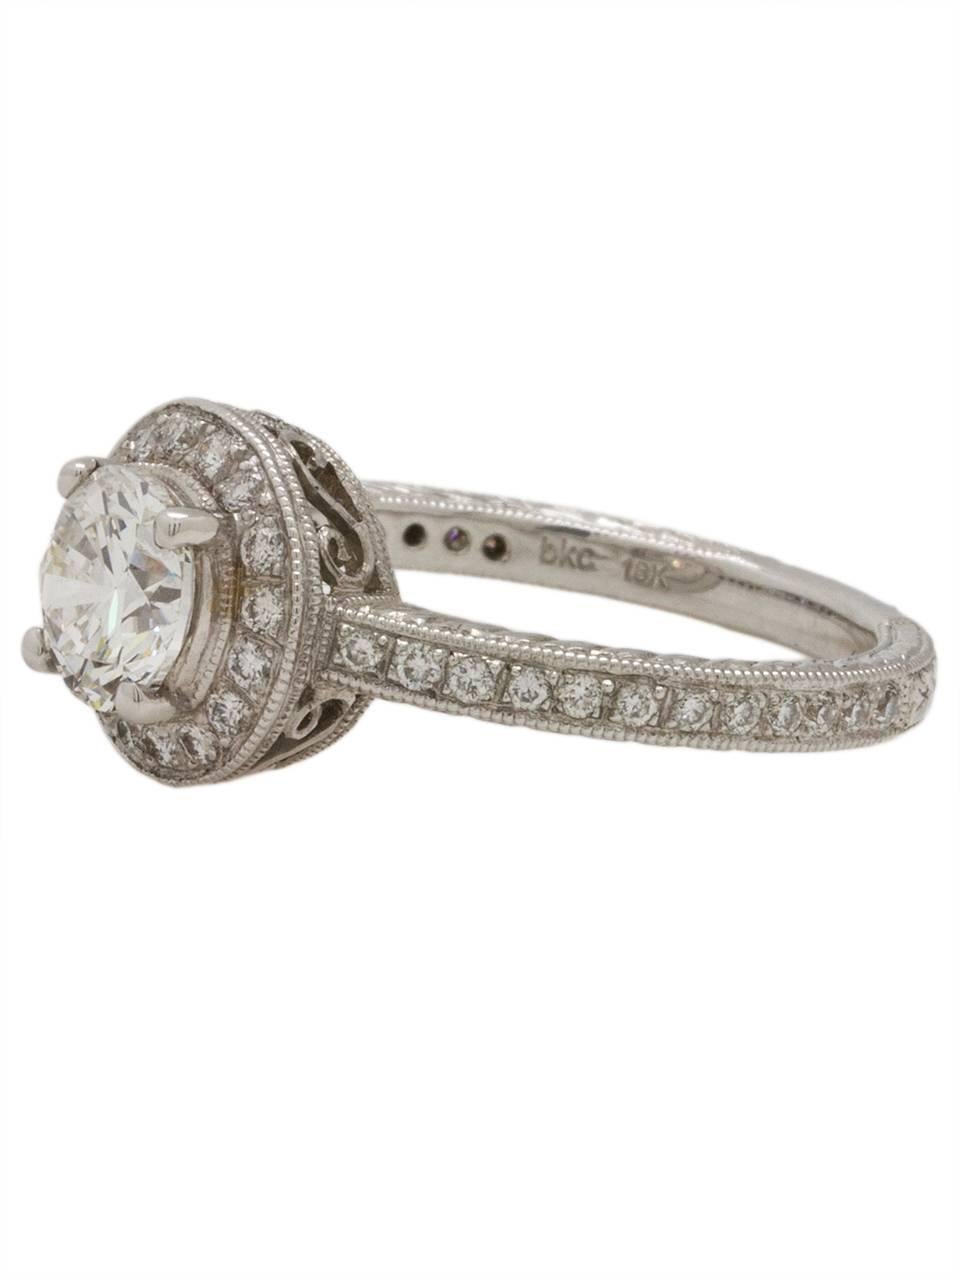 
This gorgeous 18k white gold New Vintage engagement ring is reminiscent of the 1920s and showcases a stunning 1.03ct GIA certified round brilliant cut diamond, E-SI1. This ring is brimming with detail from the hand engraved shank to the scroll